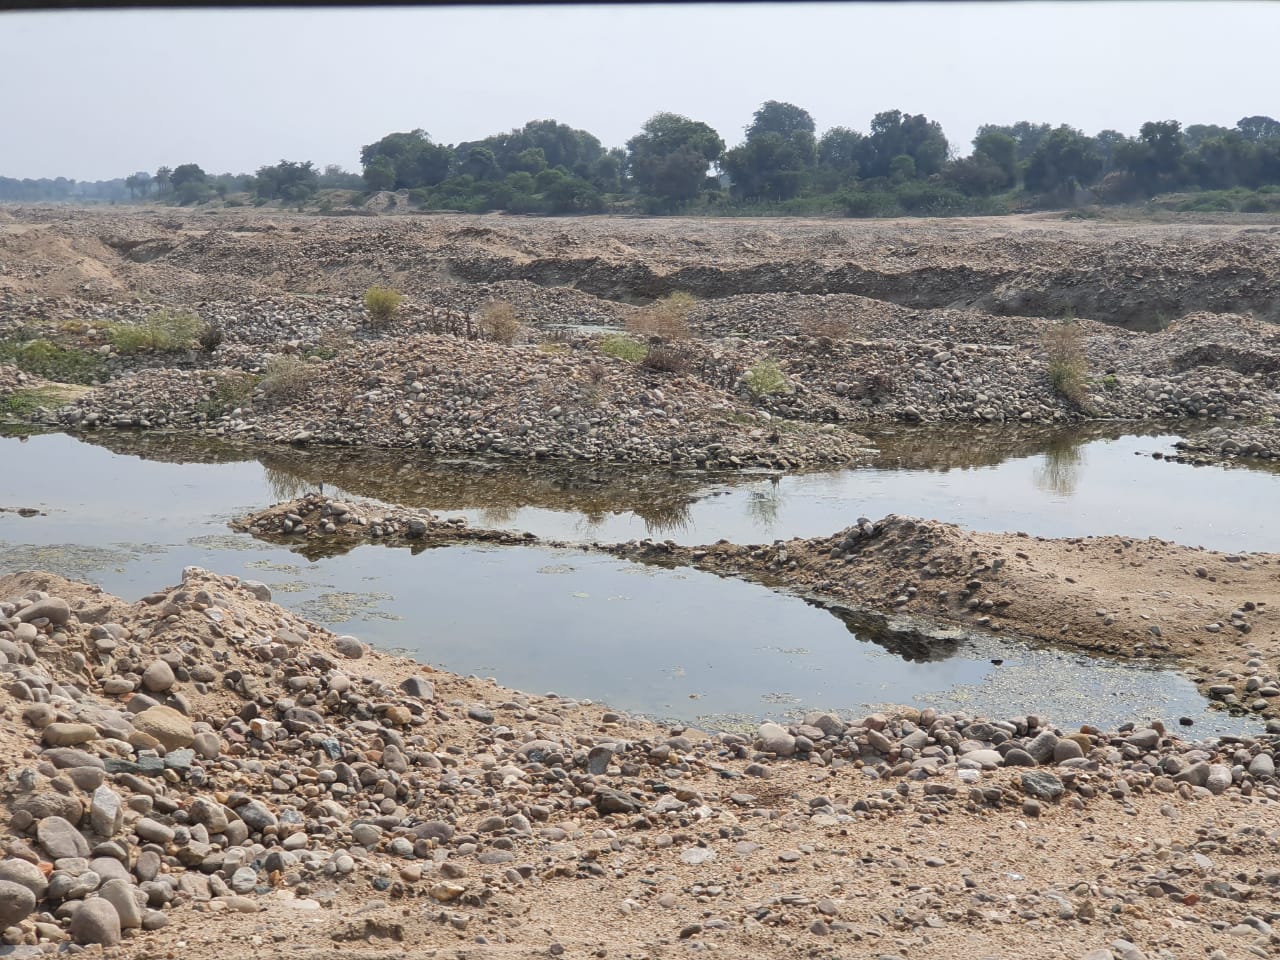 Not only Nagaur, in many districts of the state, the sewage of earth is being removed in the districts